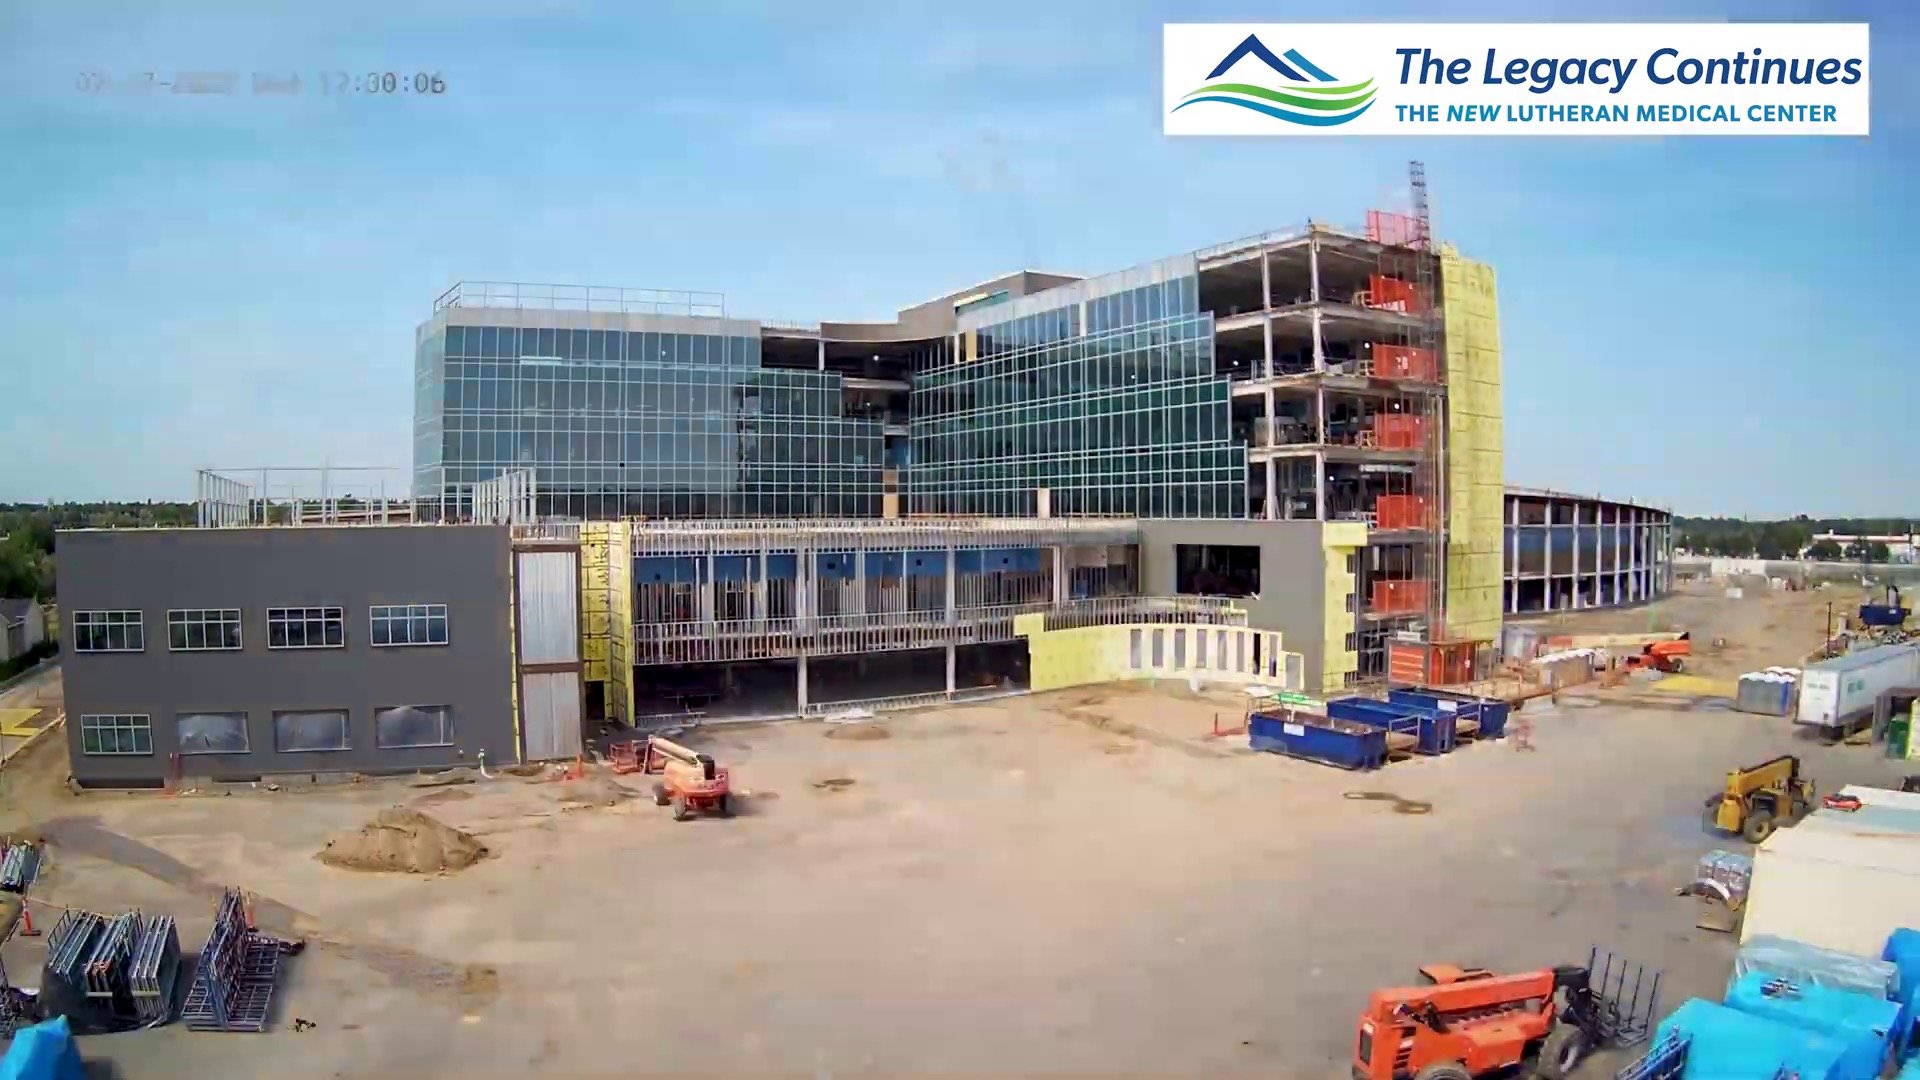 Construction-Entrance-Trackout-Control-Construction-Exit-BMP-VTP-Vehicle-Tracking-Pad-Reusable-Construction-Entrance-Trackout-Control-Mat-System-Installed-At-SCL-Health-Intermountain-Health-32.jpeg